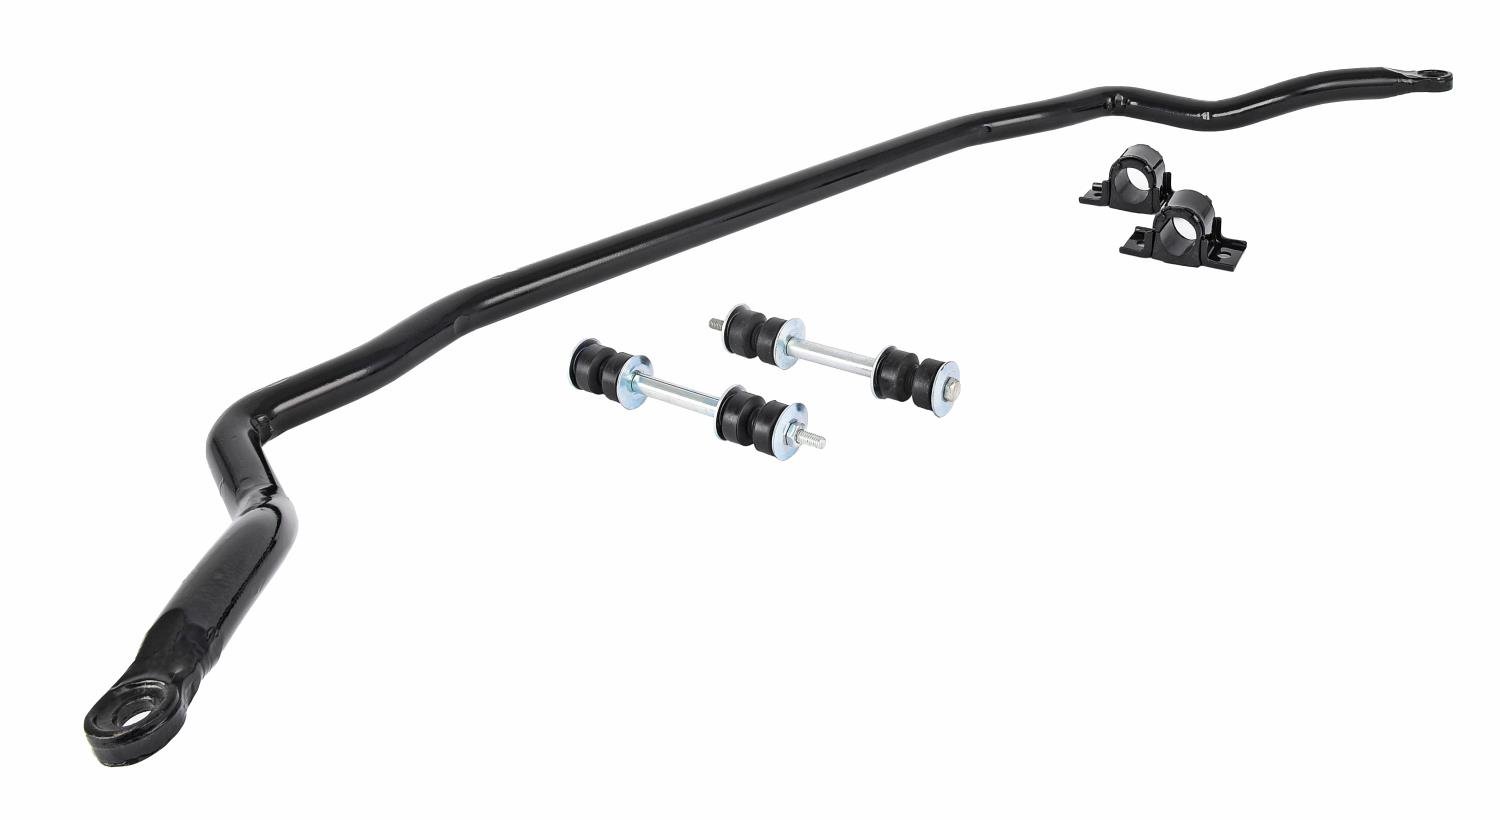 Front Sway Bar Kit Fits Select 1964-1979 Buick, Cadillac, Chevrolet, Oldsmobile, Pontiac Models [1.250 in. Diameter]